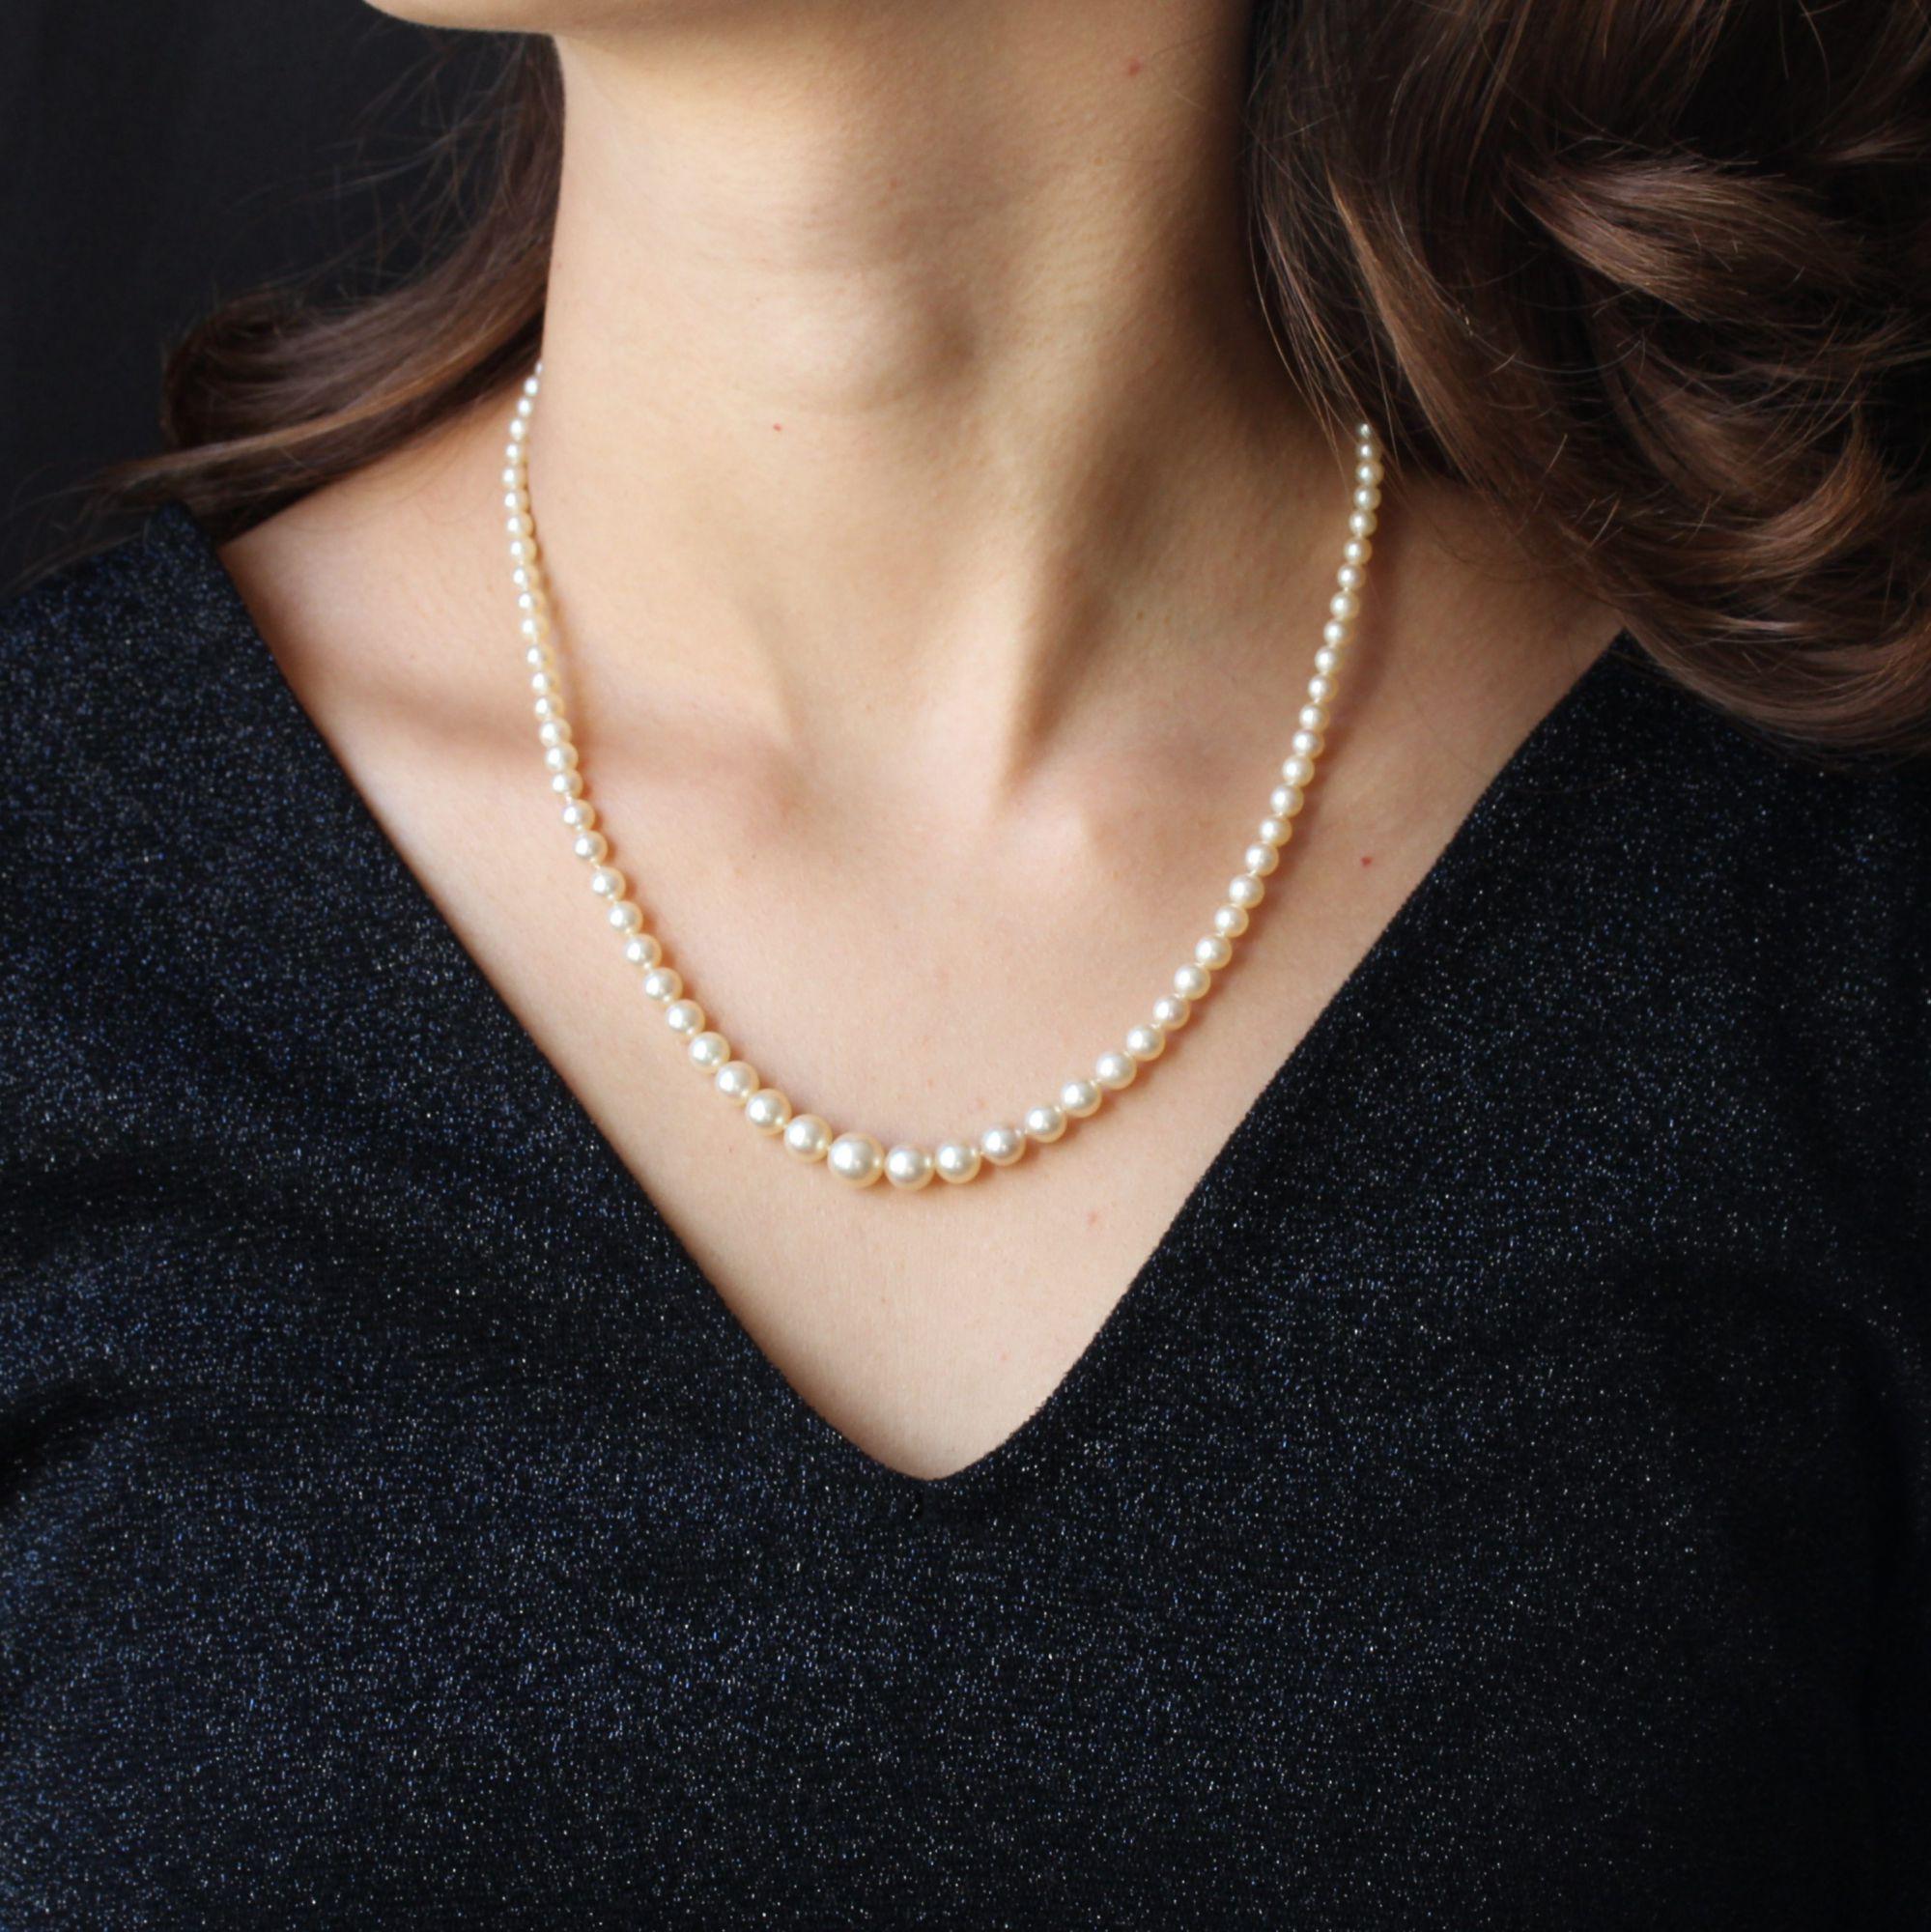 Cultured pearl necklace in fall, pinkish white orient.
The clasp, in 18 karat white gold, is rectangular in shape, openwork at the ends and set in the center of a brilliant-cut diamond, surrounded by 8/8- cut diamonds. The clasp is ratchet with